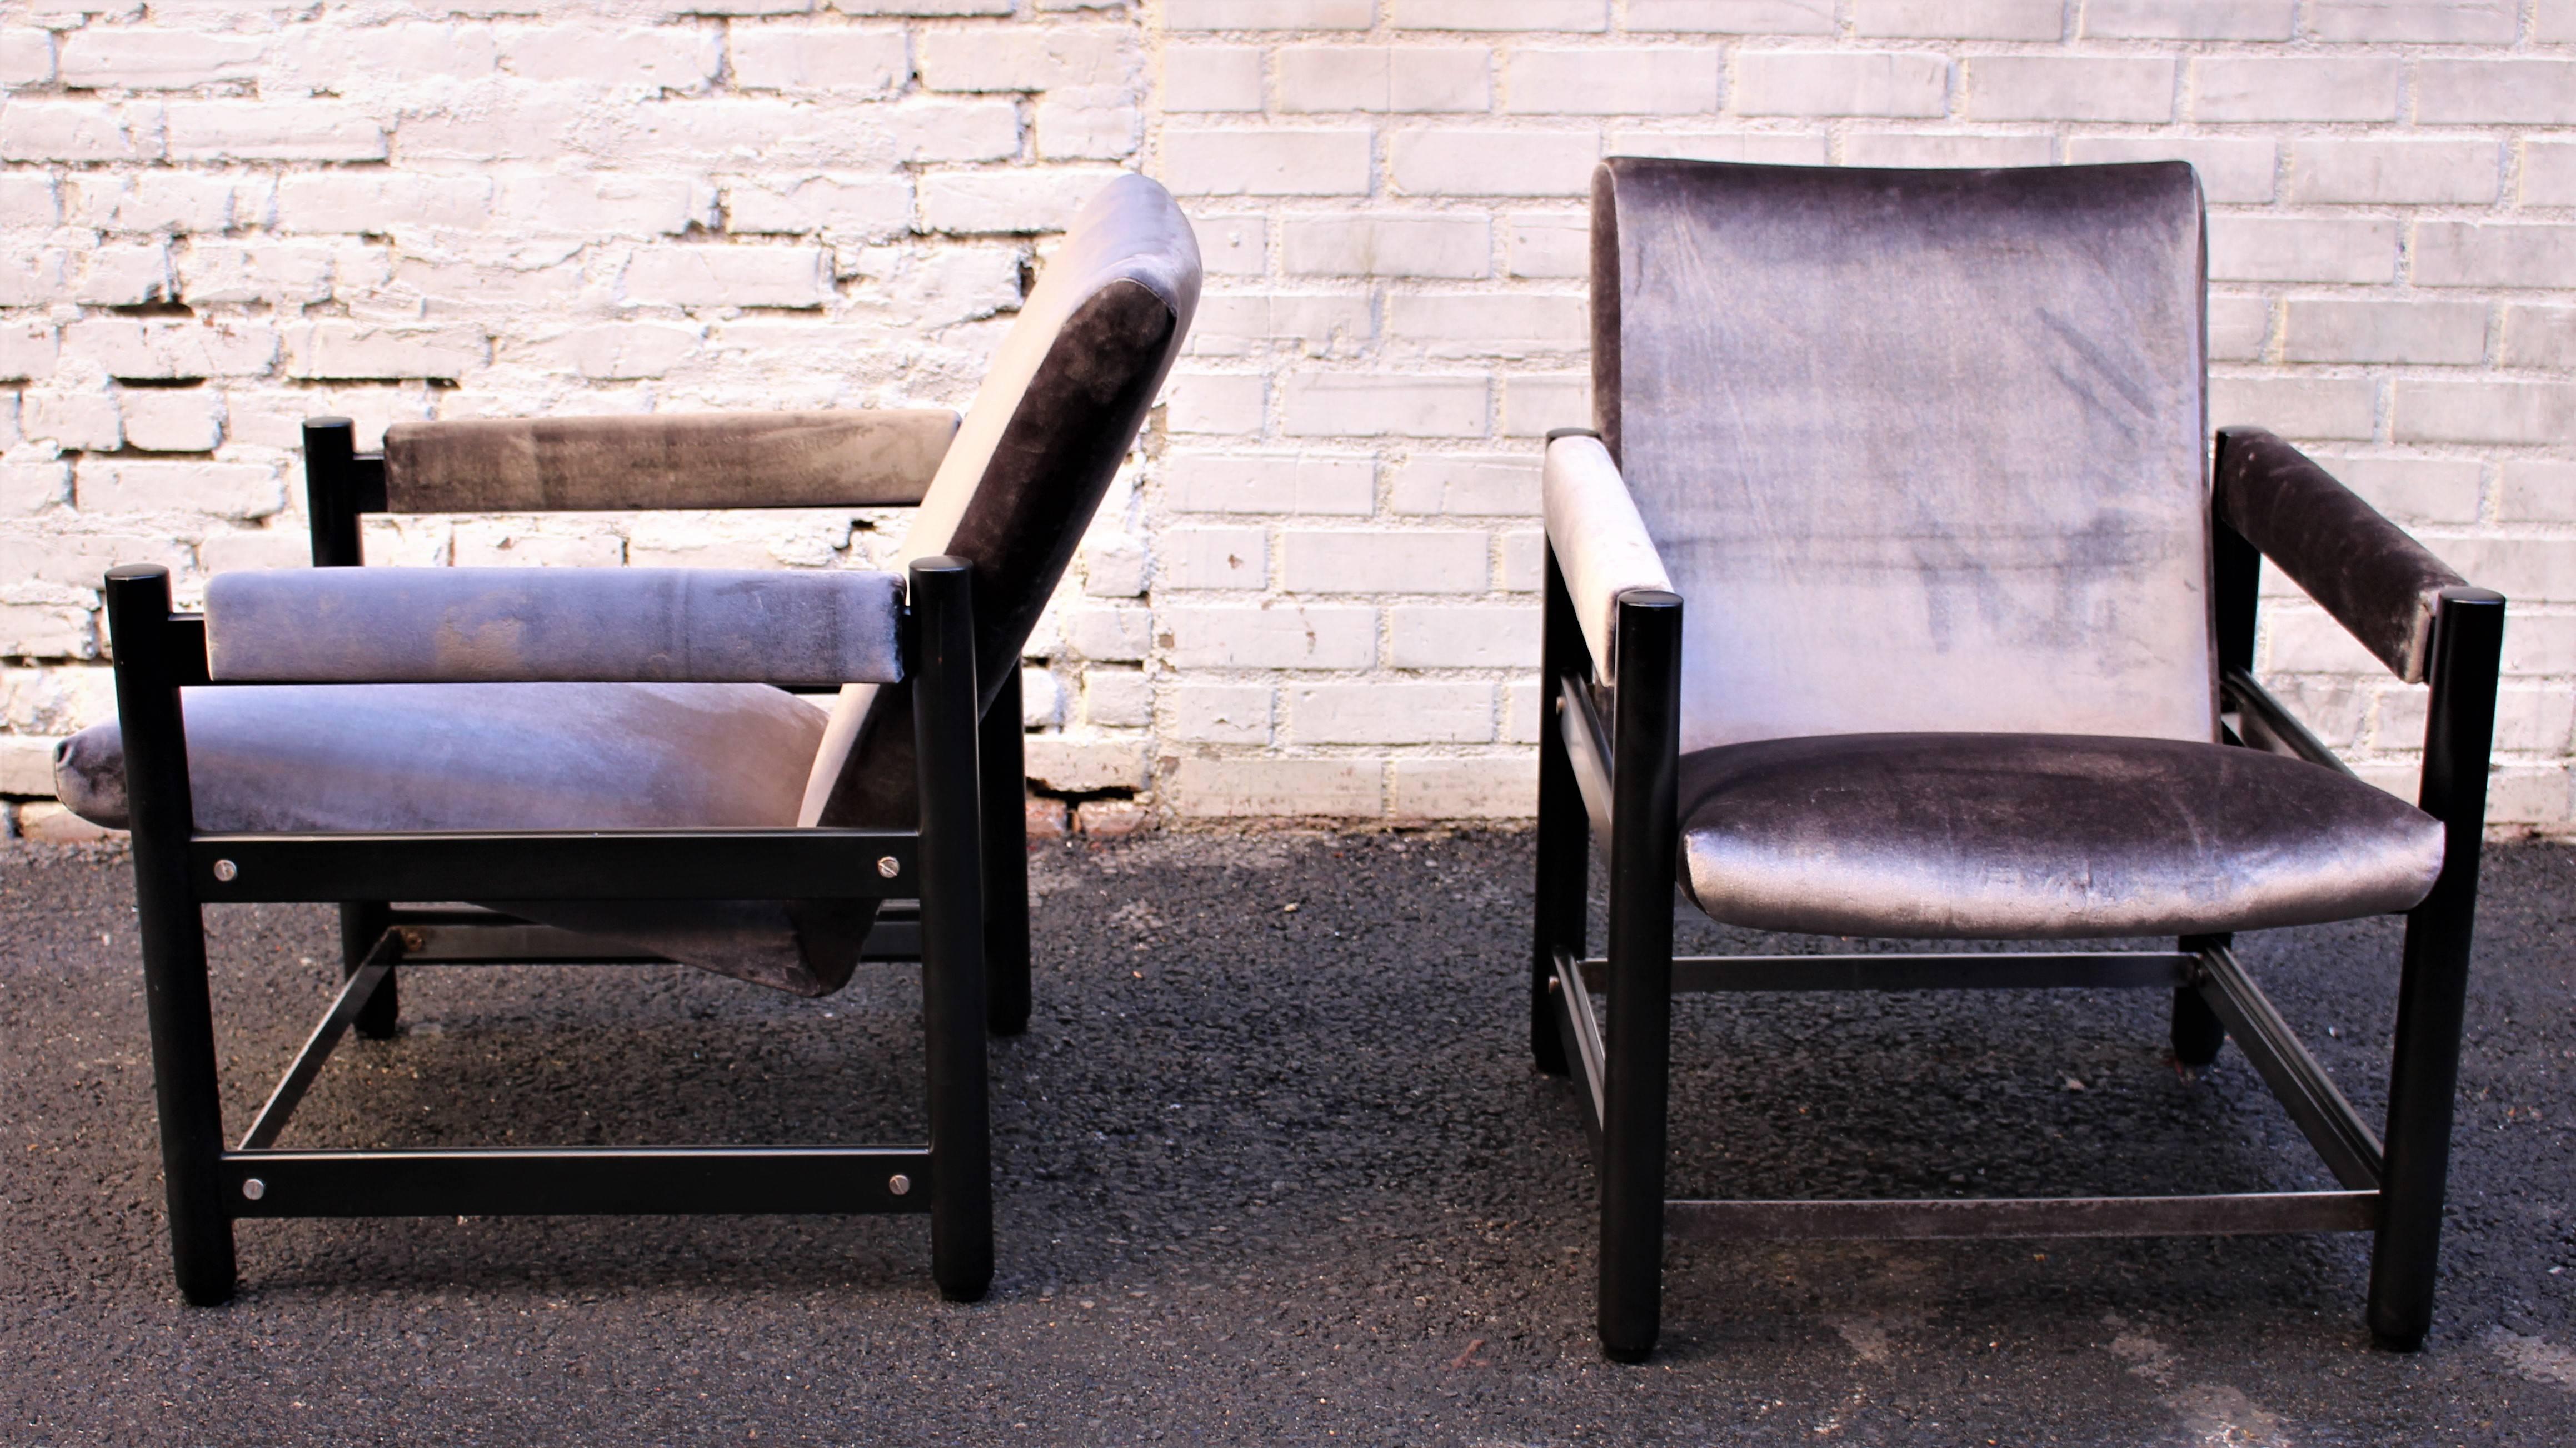 Italian chairs black wood lacquered base and metal holders new upholstery gray velvet.